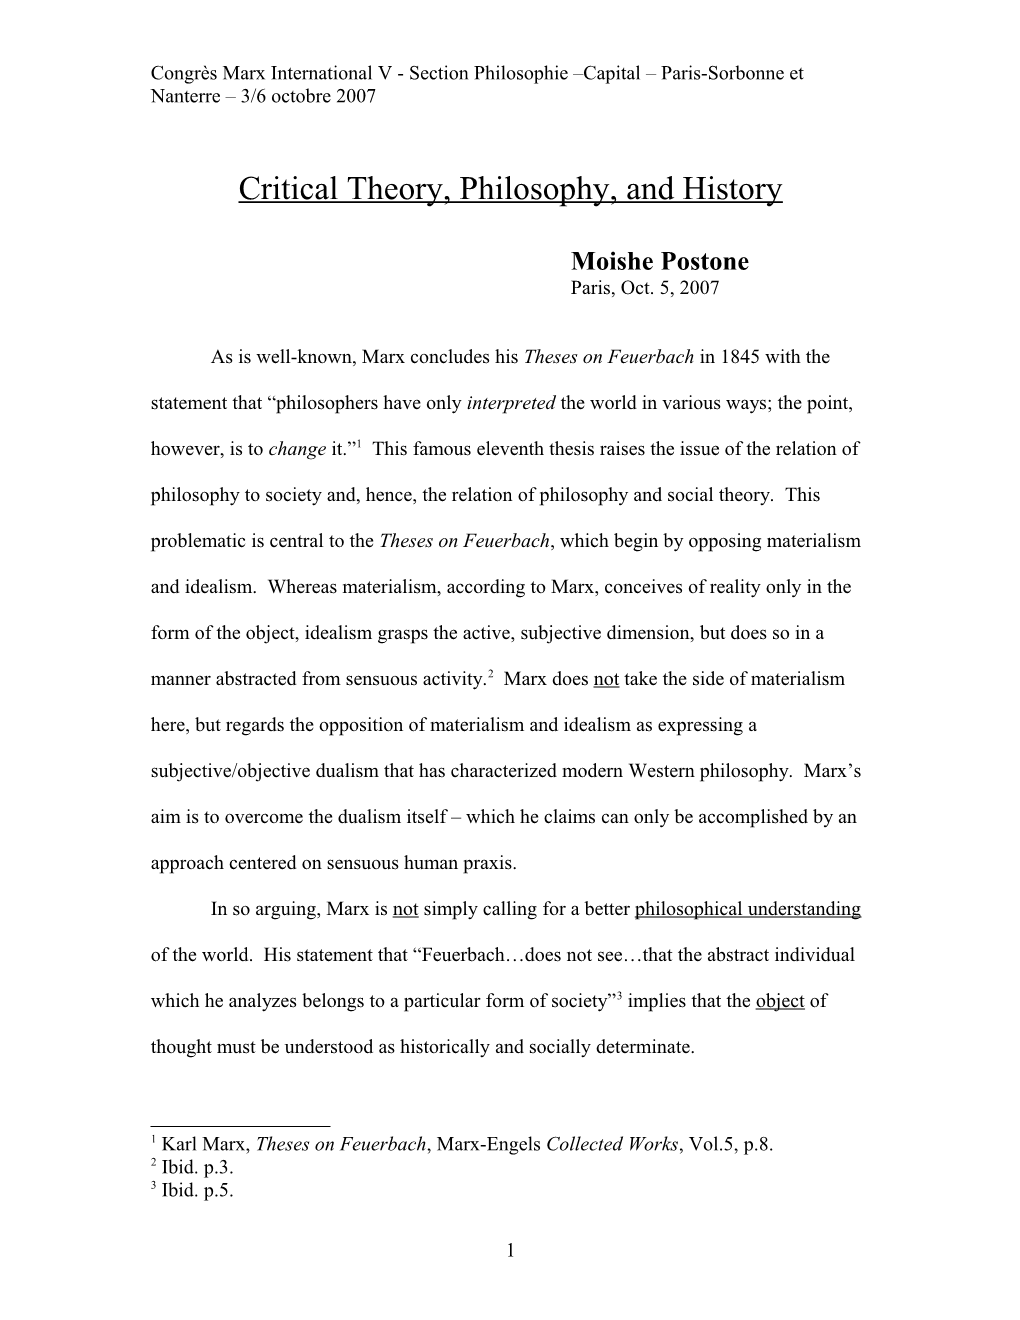 Critical Theory, Philosophy, and History